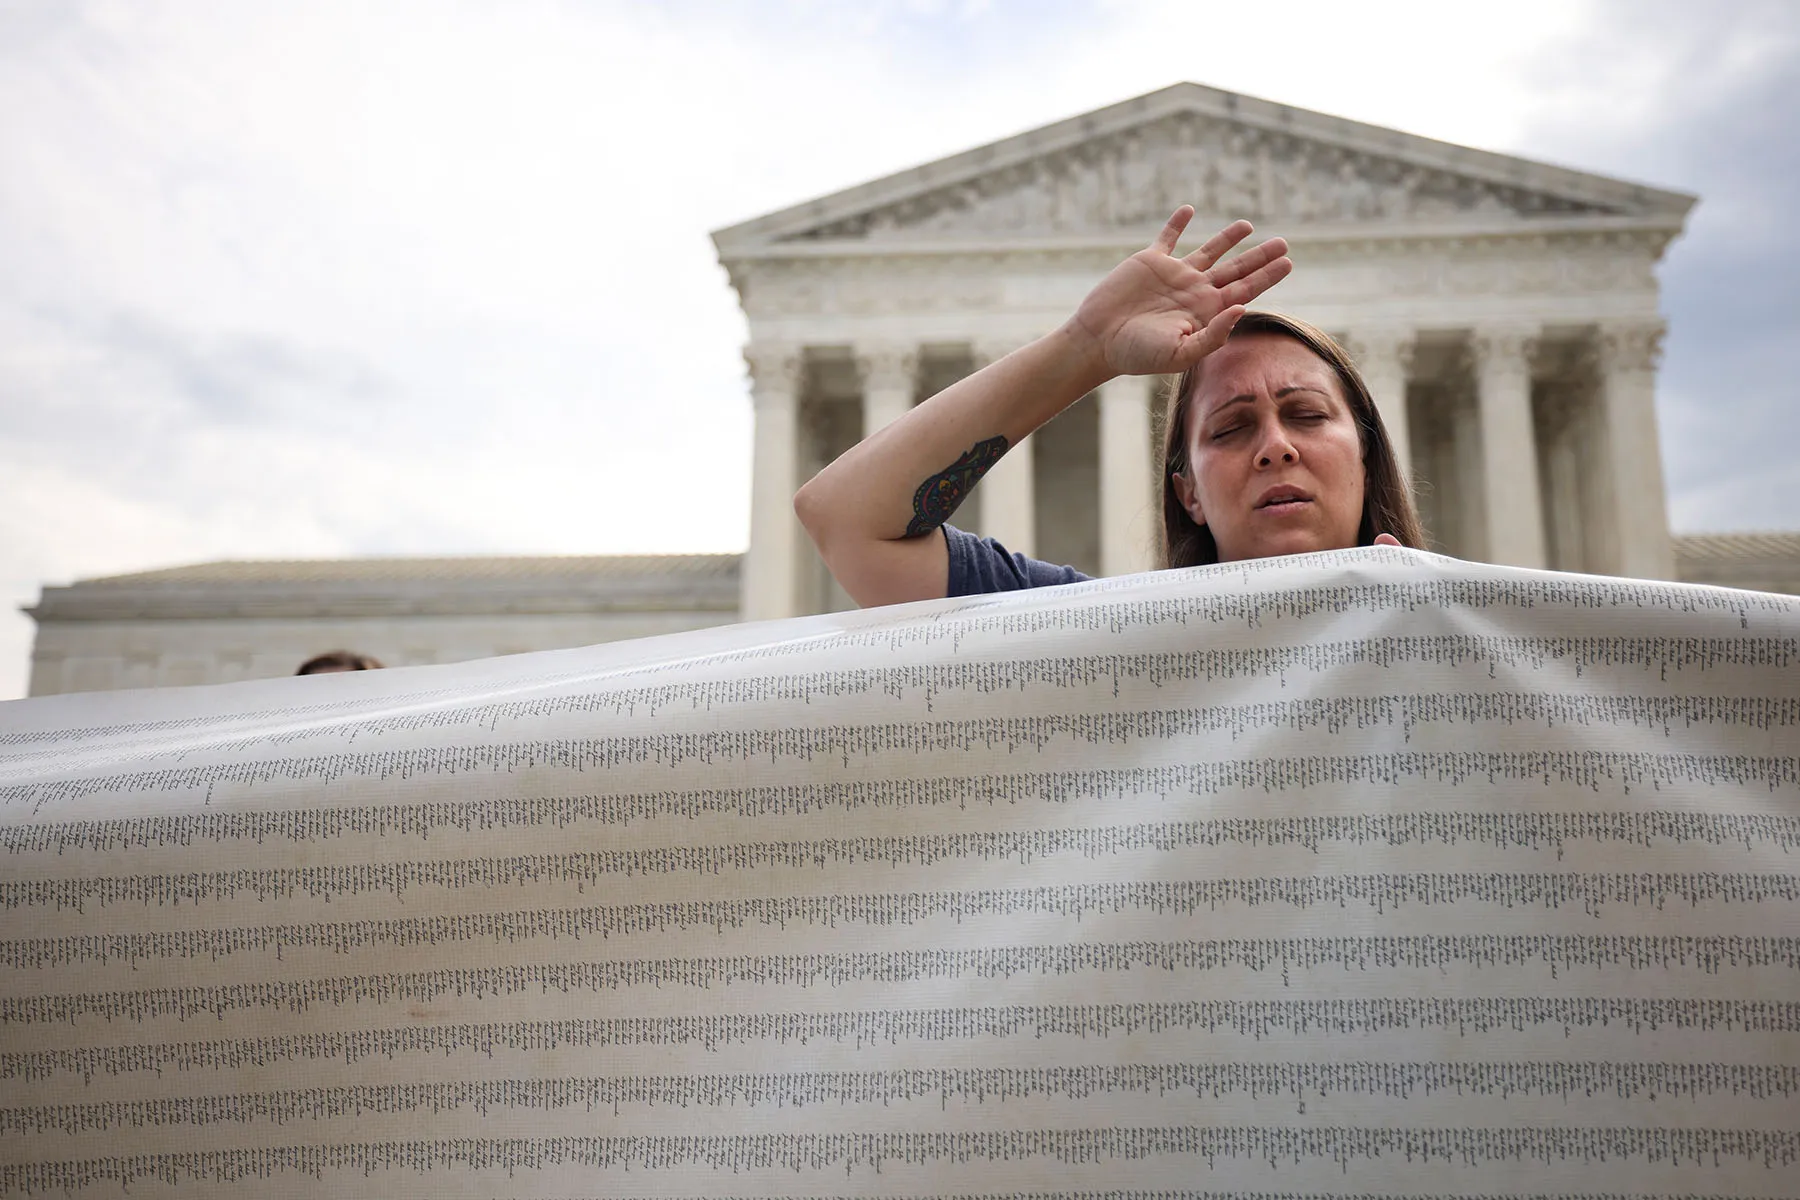 An anti-abortion activist holds a petition to end abortion outside of the Supreme Court.